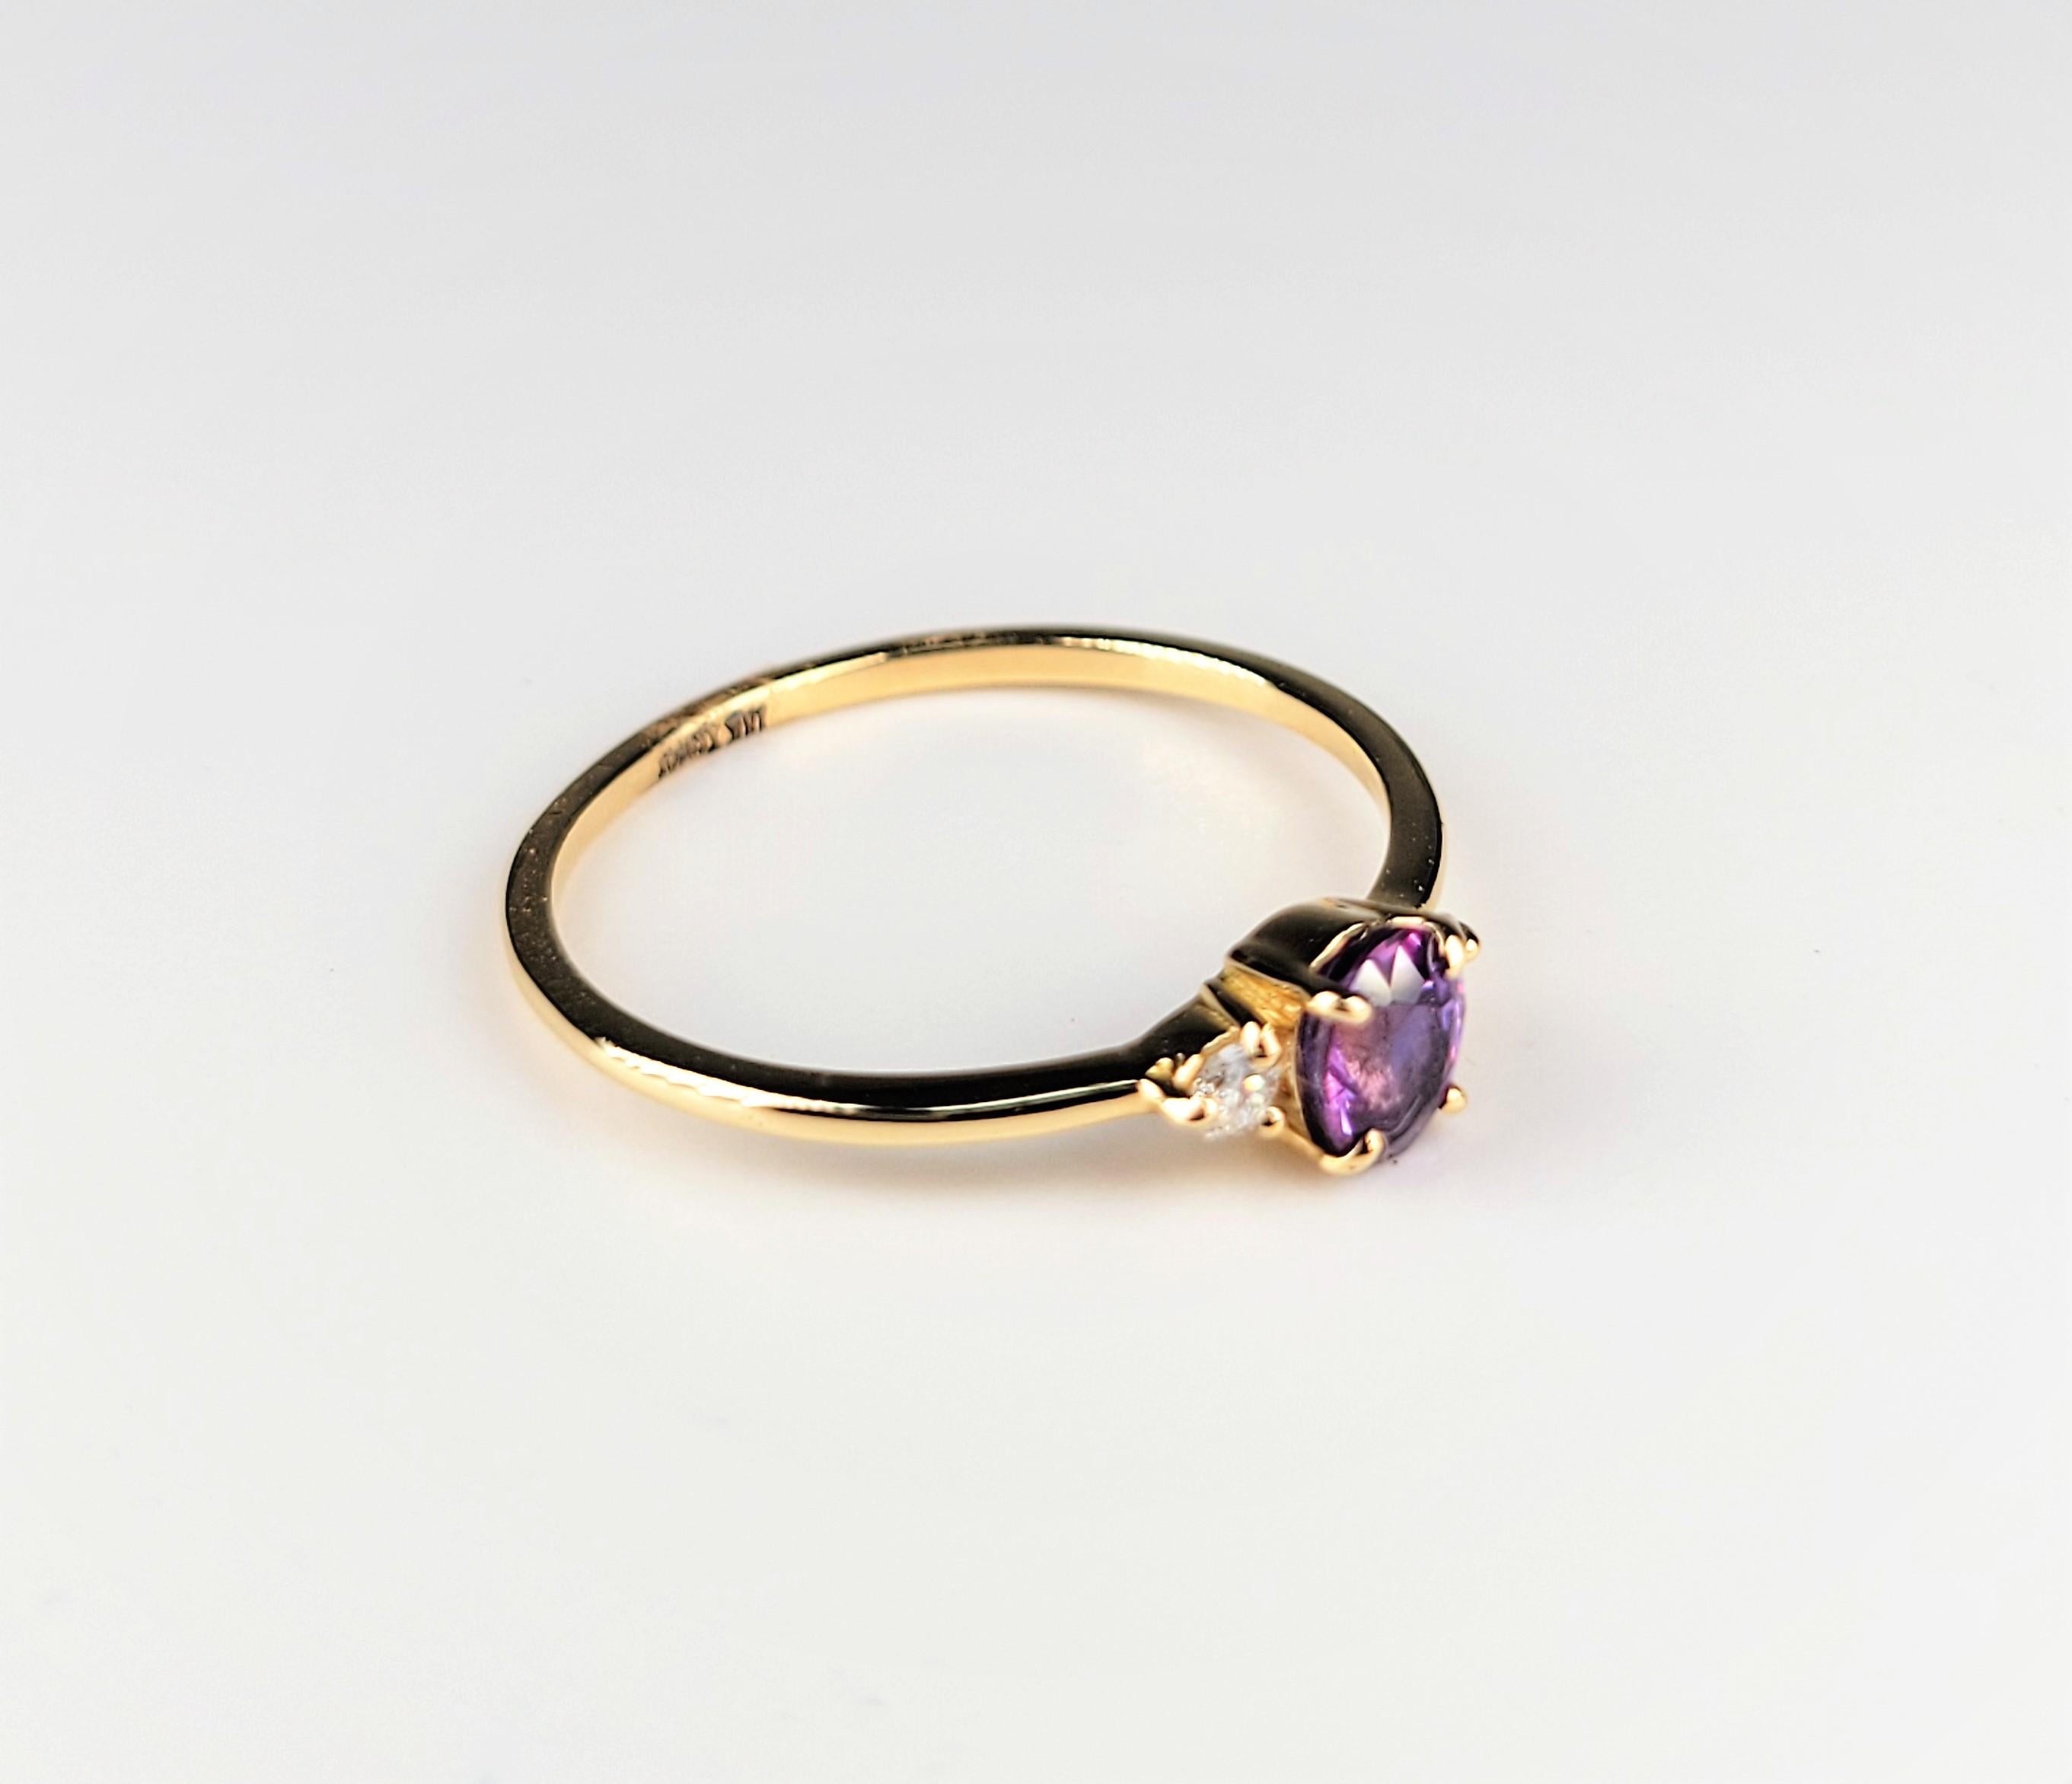 In 18 karat yellow gold, this lovely 3 stone ring is centered with an oval-shaped pink tourmaline, which is flanked by diamonds. 